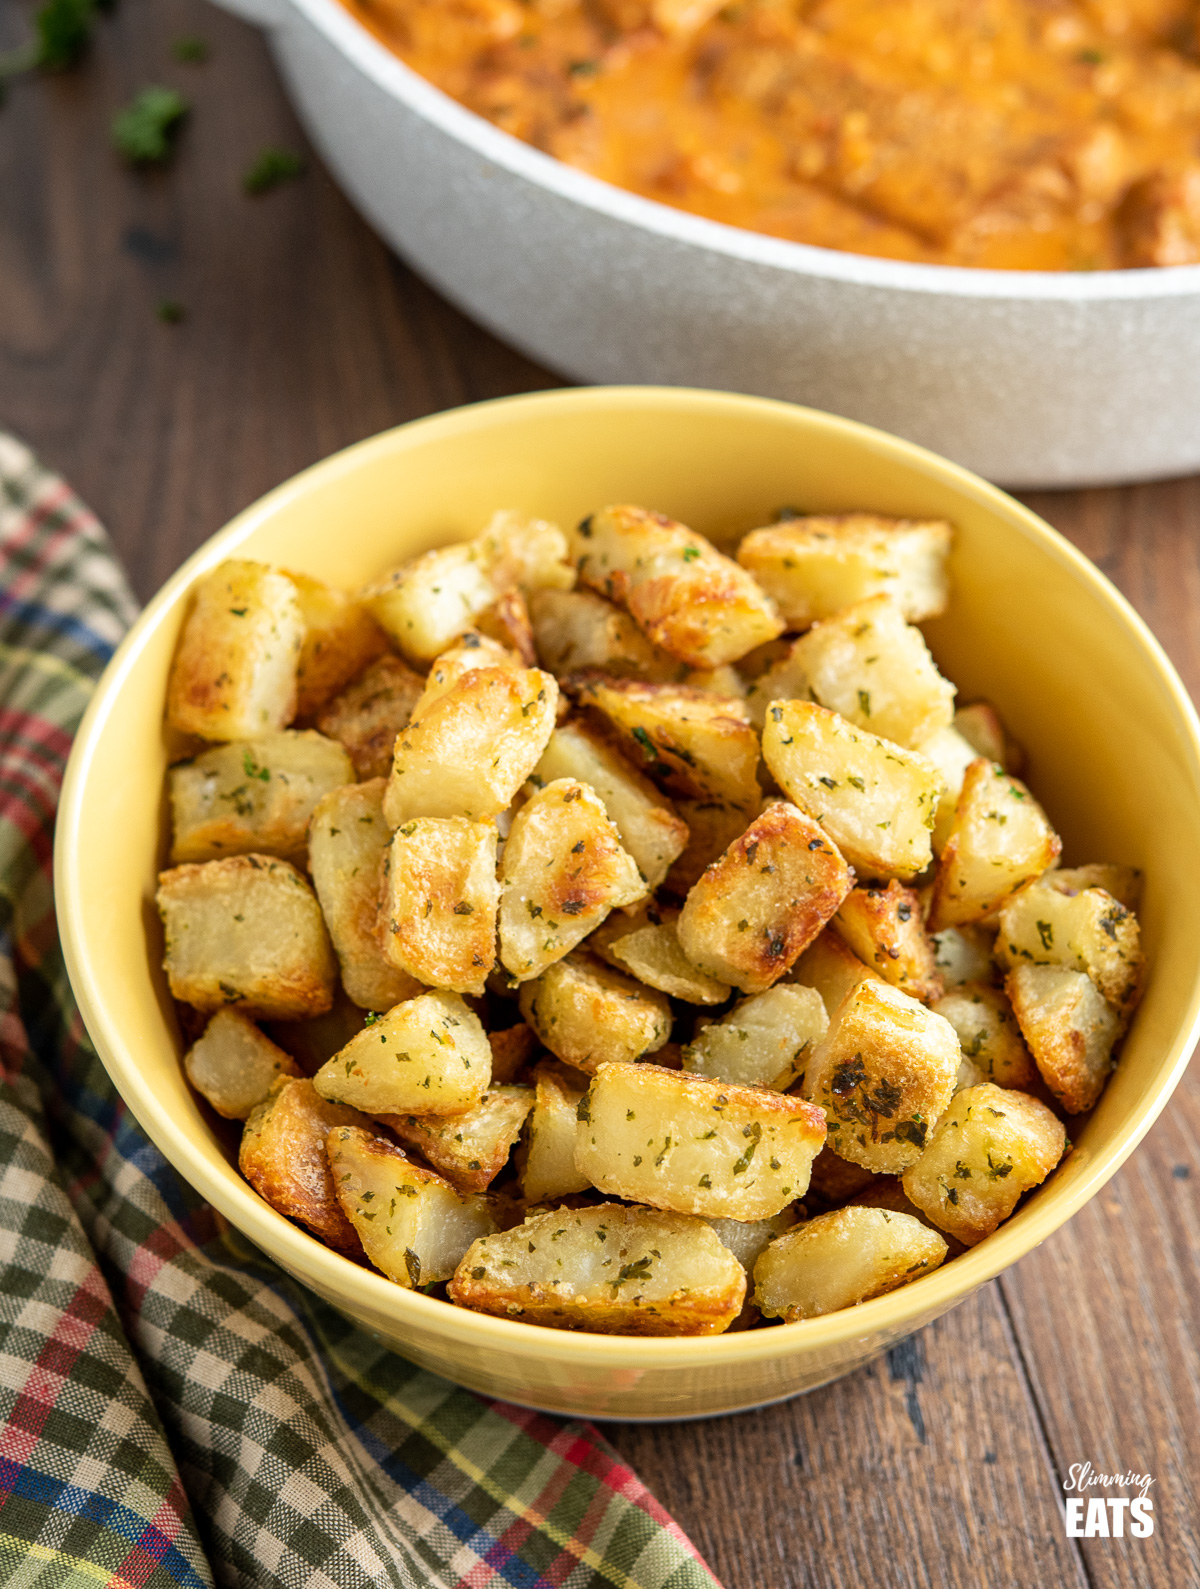 Garlic and Herb Roasted Potatoes in yellow bowl